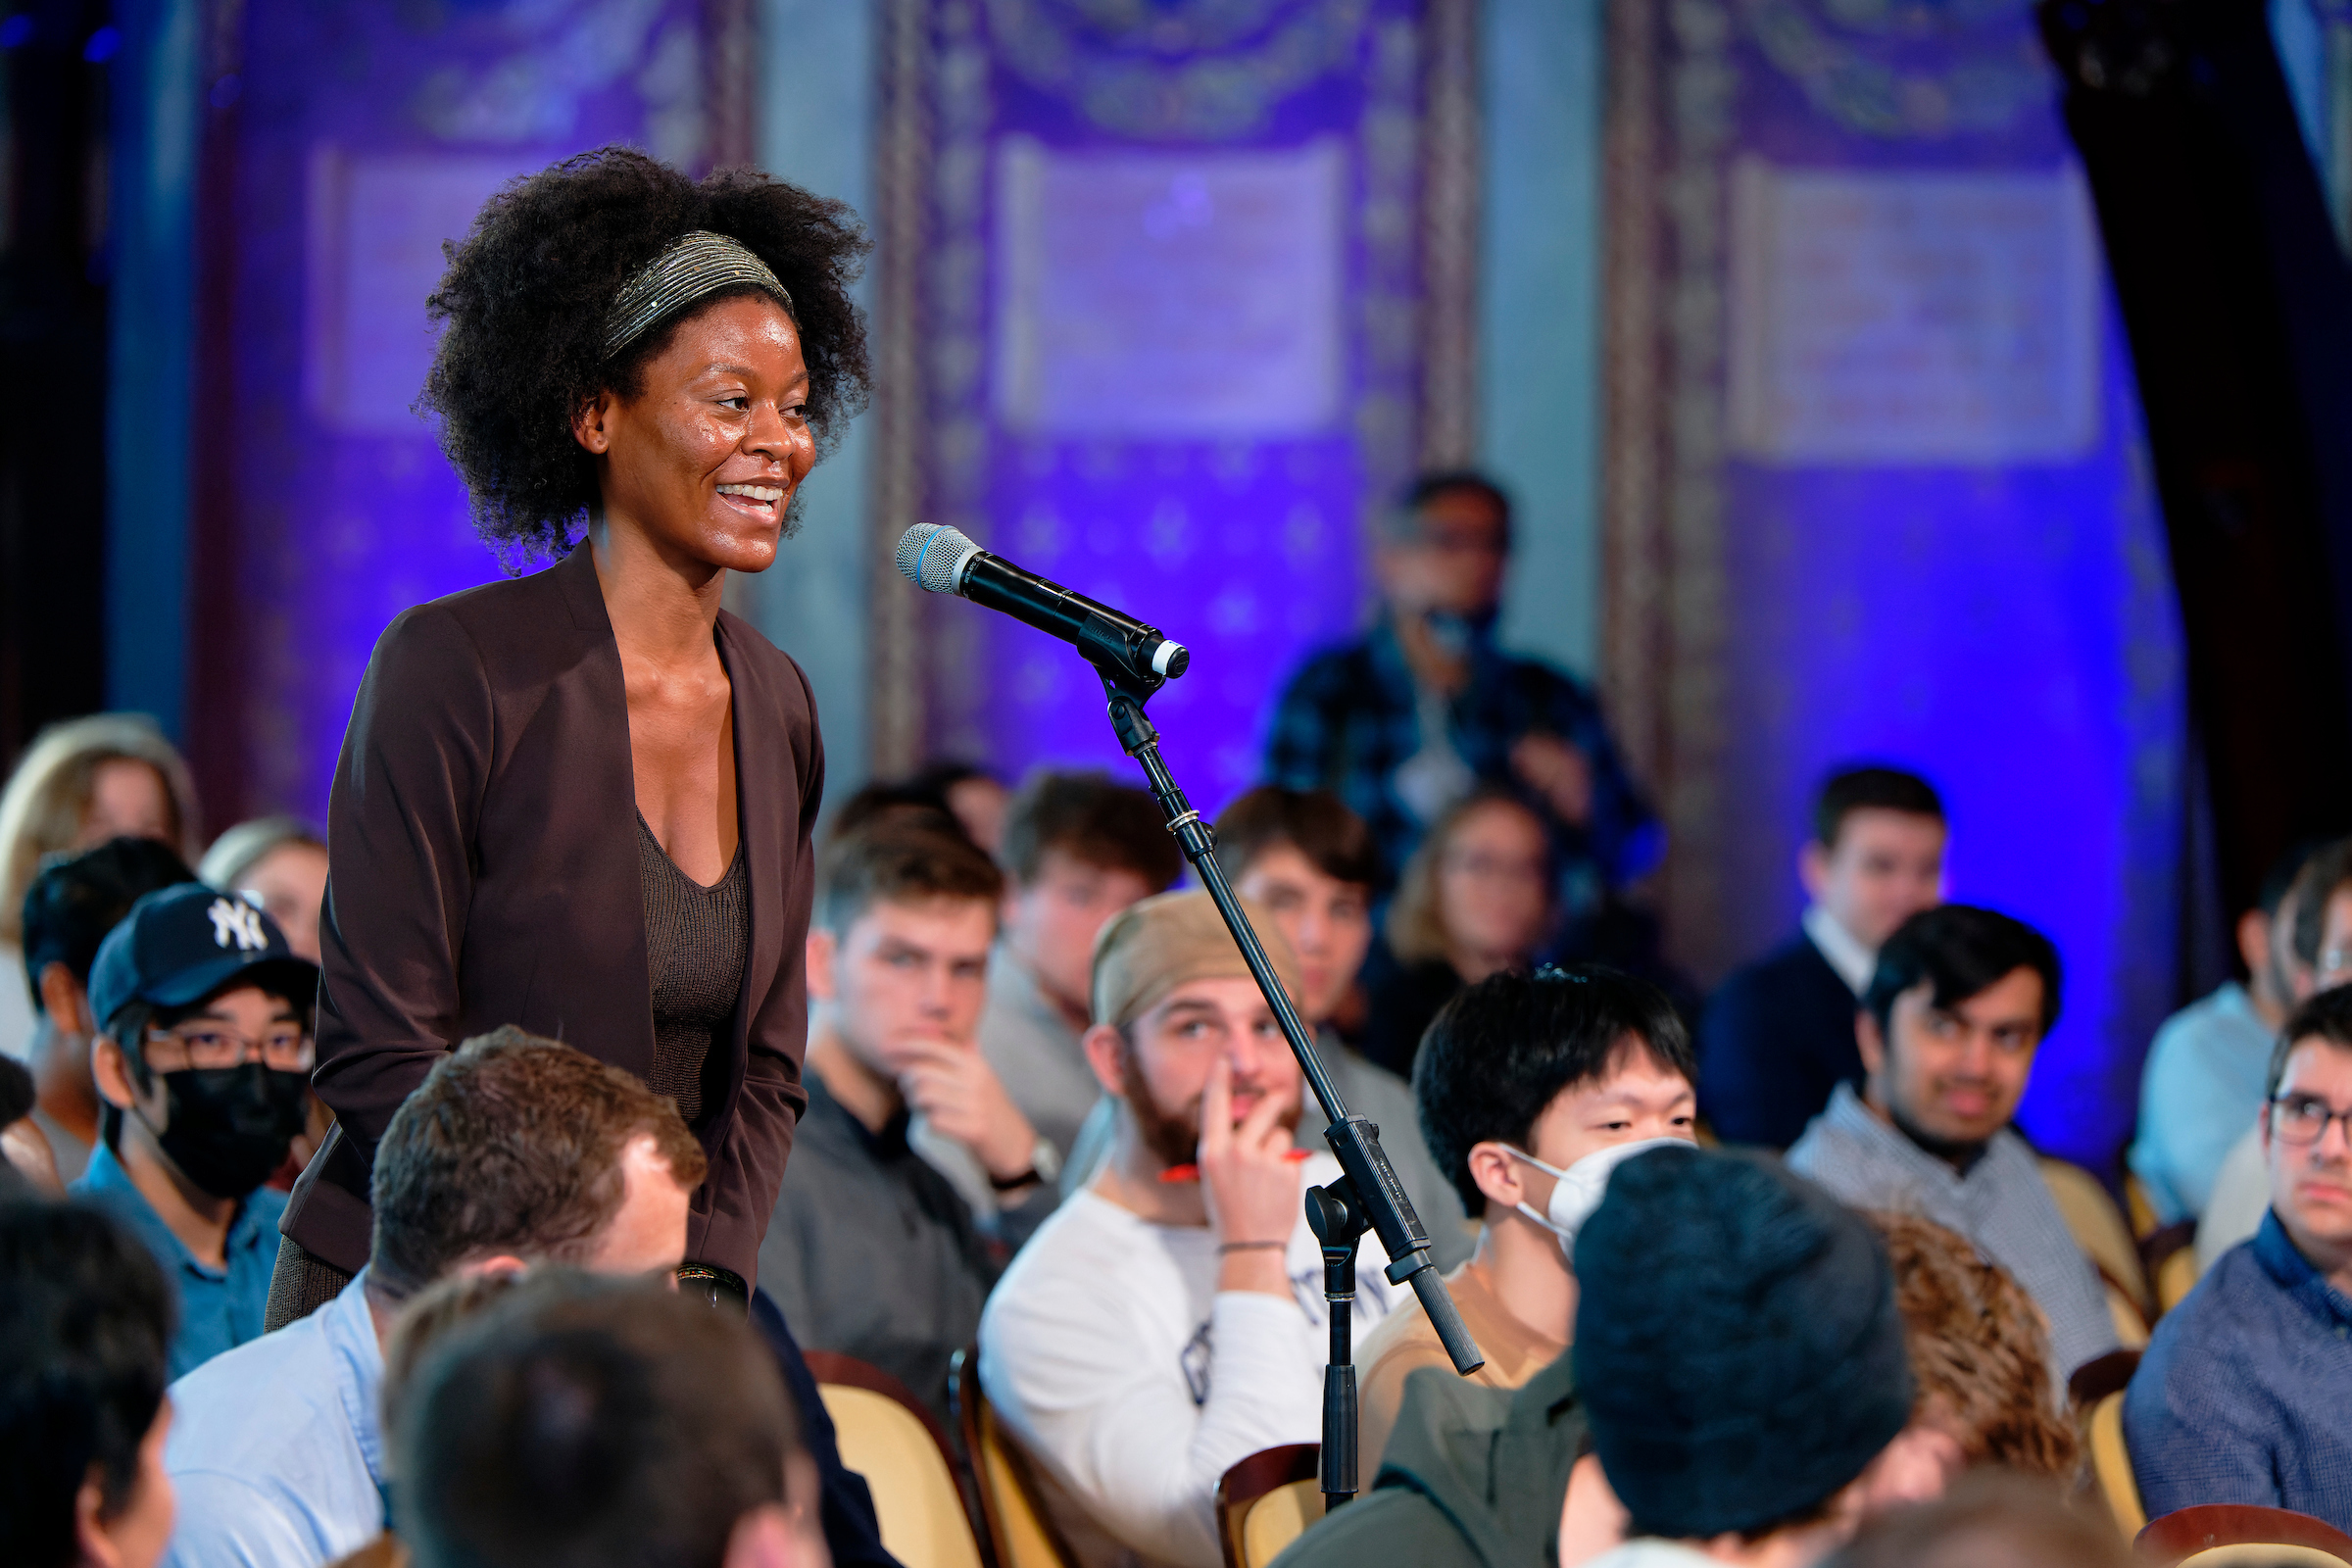 Young woman asks a question into a microphone while her peers look on from the audience